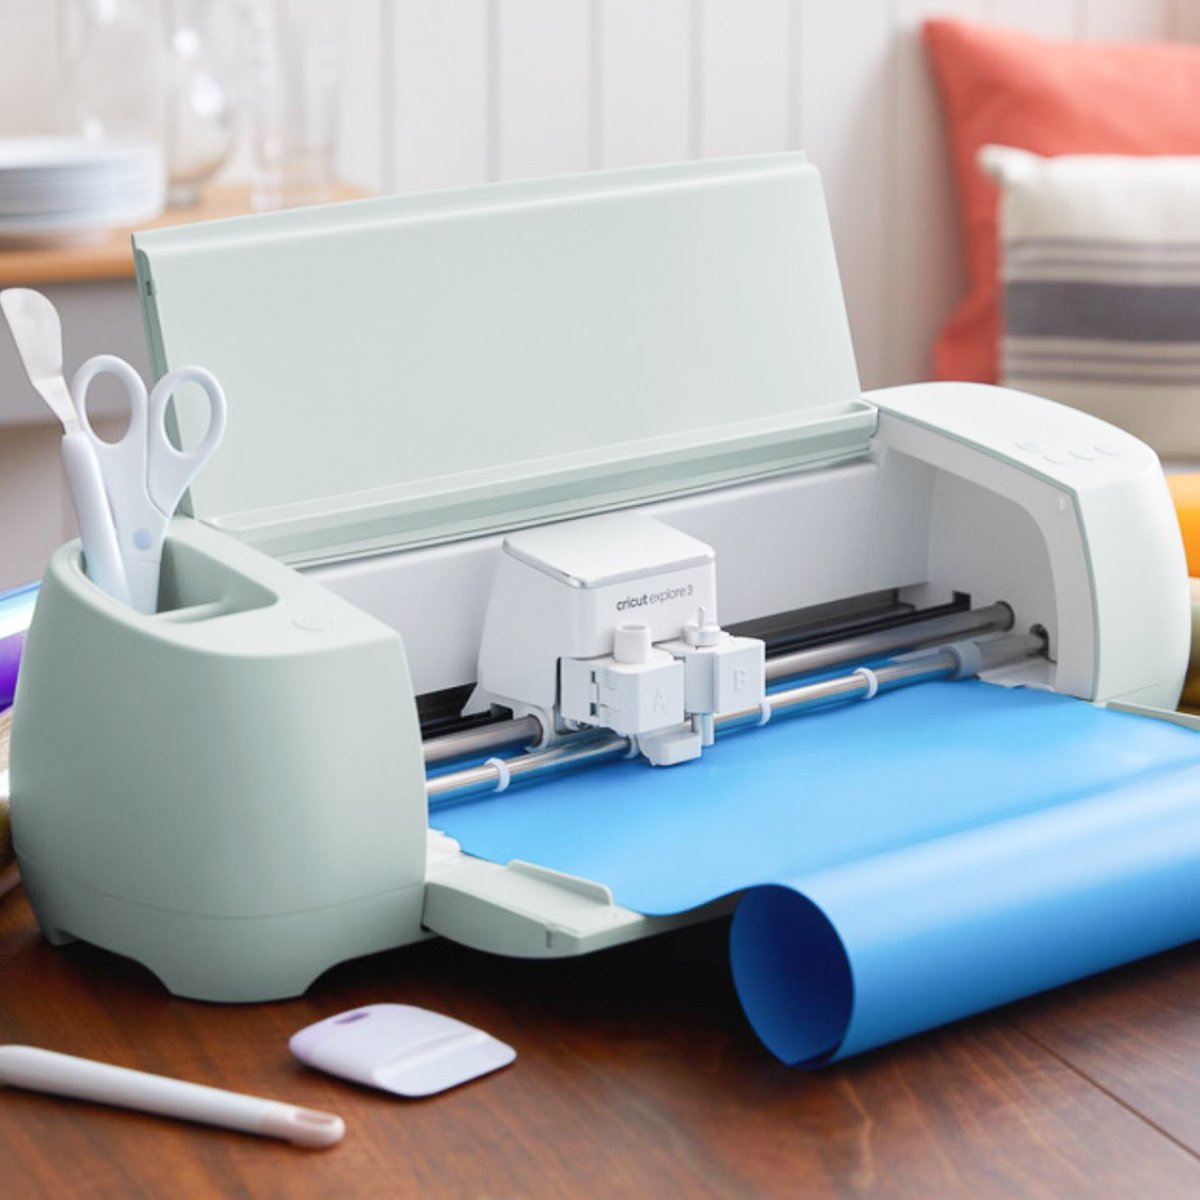 Cricut Explore 3: What is different? What is the same? - Angie